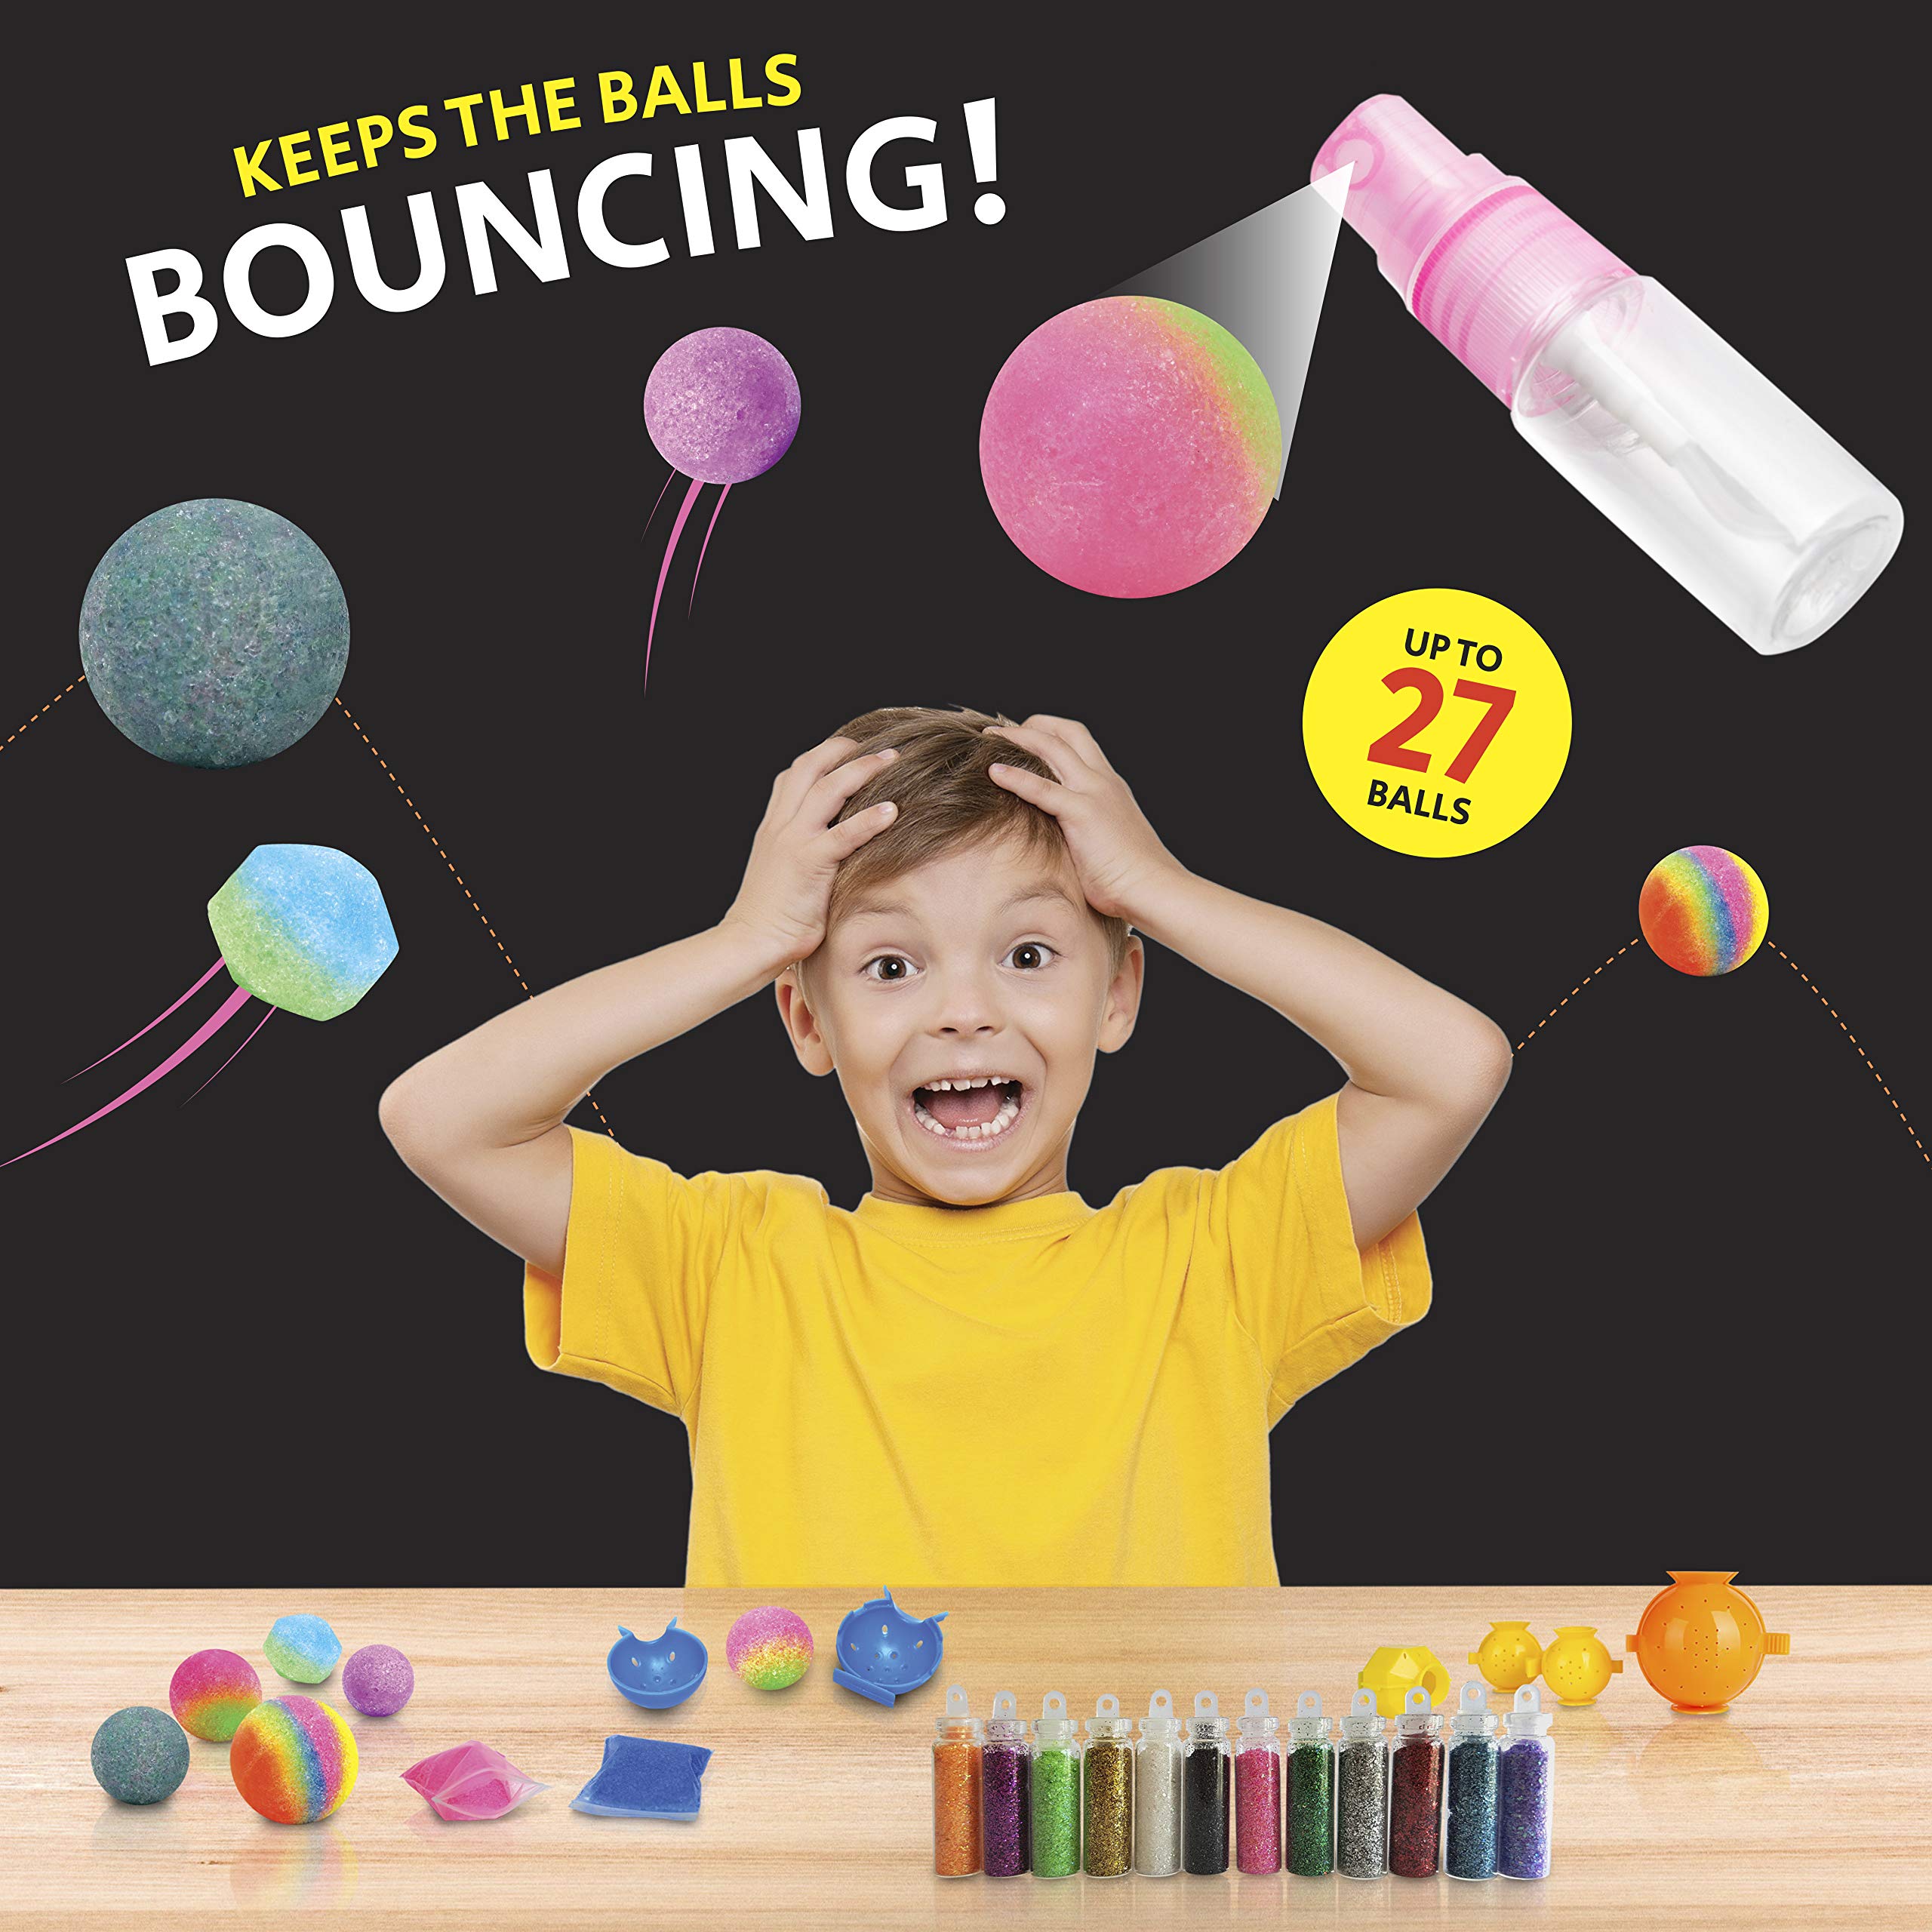 DIY Super Bouncy Balls Kit - Make Your Own Bouncy Balls, Crystal Power Kids Crafts Kits, Multi-Colored Glow in The Dark Powder, Molds, Glitter, Science Experiments for Kids 6-8 9 10 11 12 Years Old